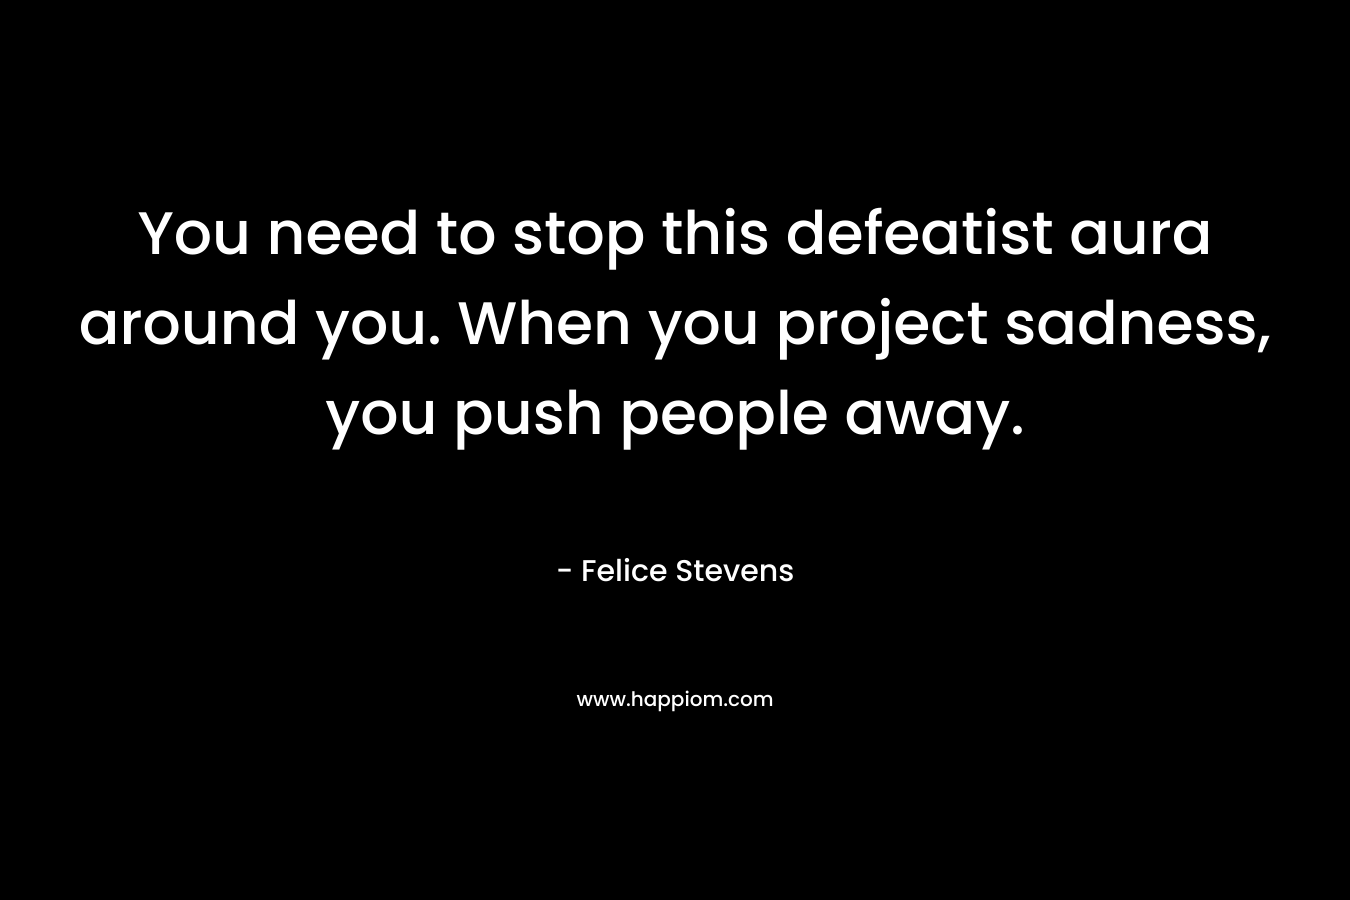 You need to stop this defeatist aura around you. When you project sadness, you push people away. – Felice Stevens